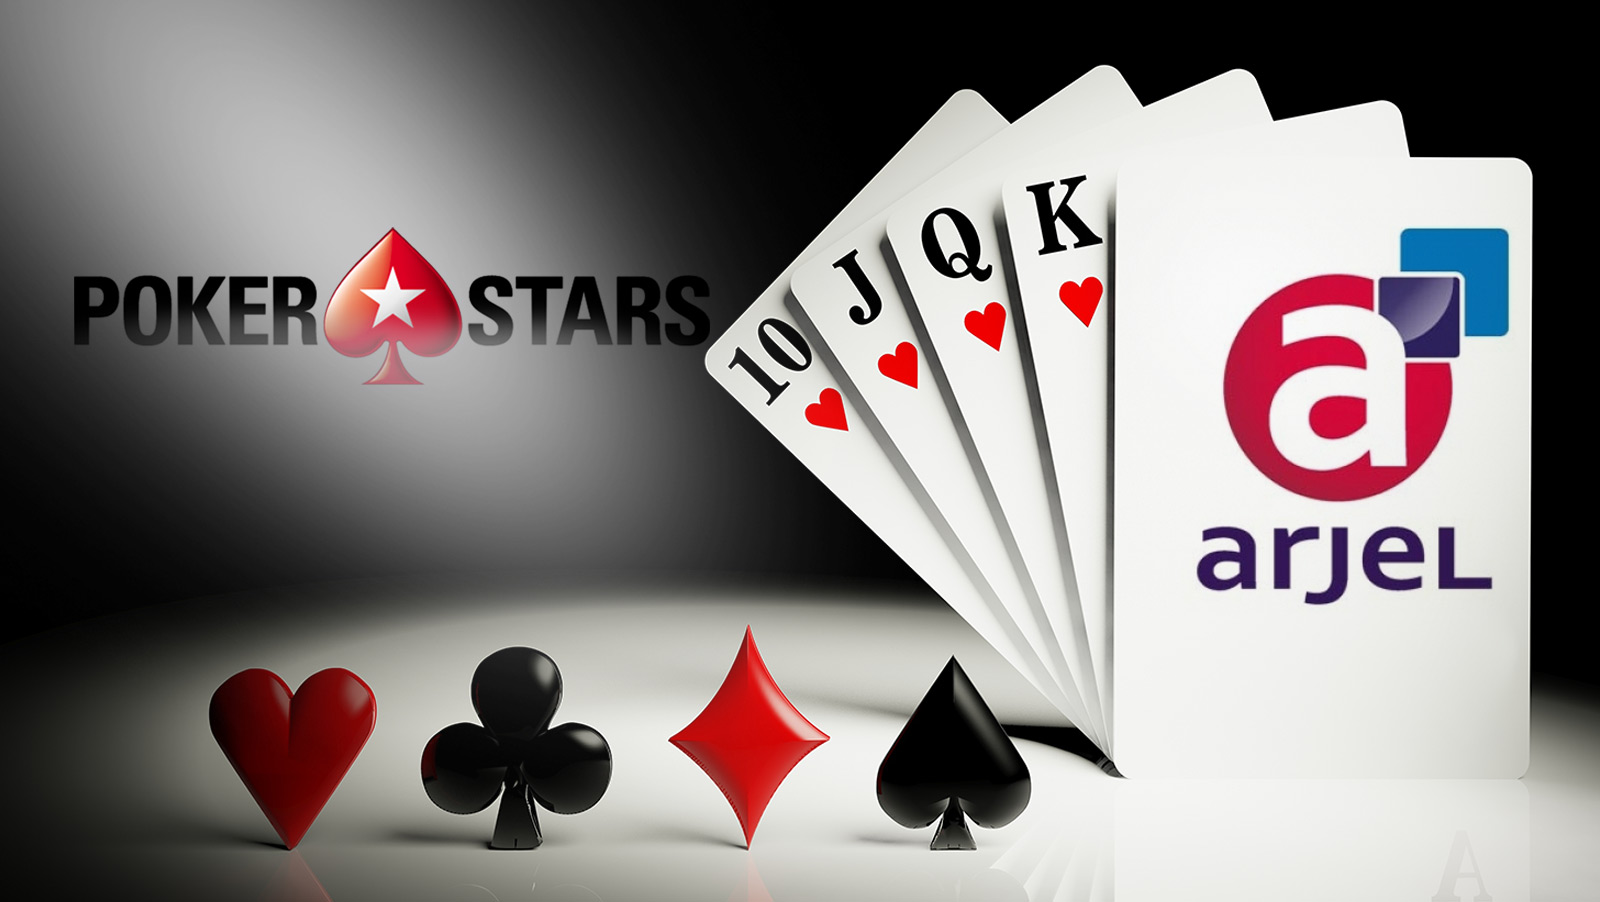 PokerStars become the first to receive shared liquidity licence via ARJEL